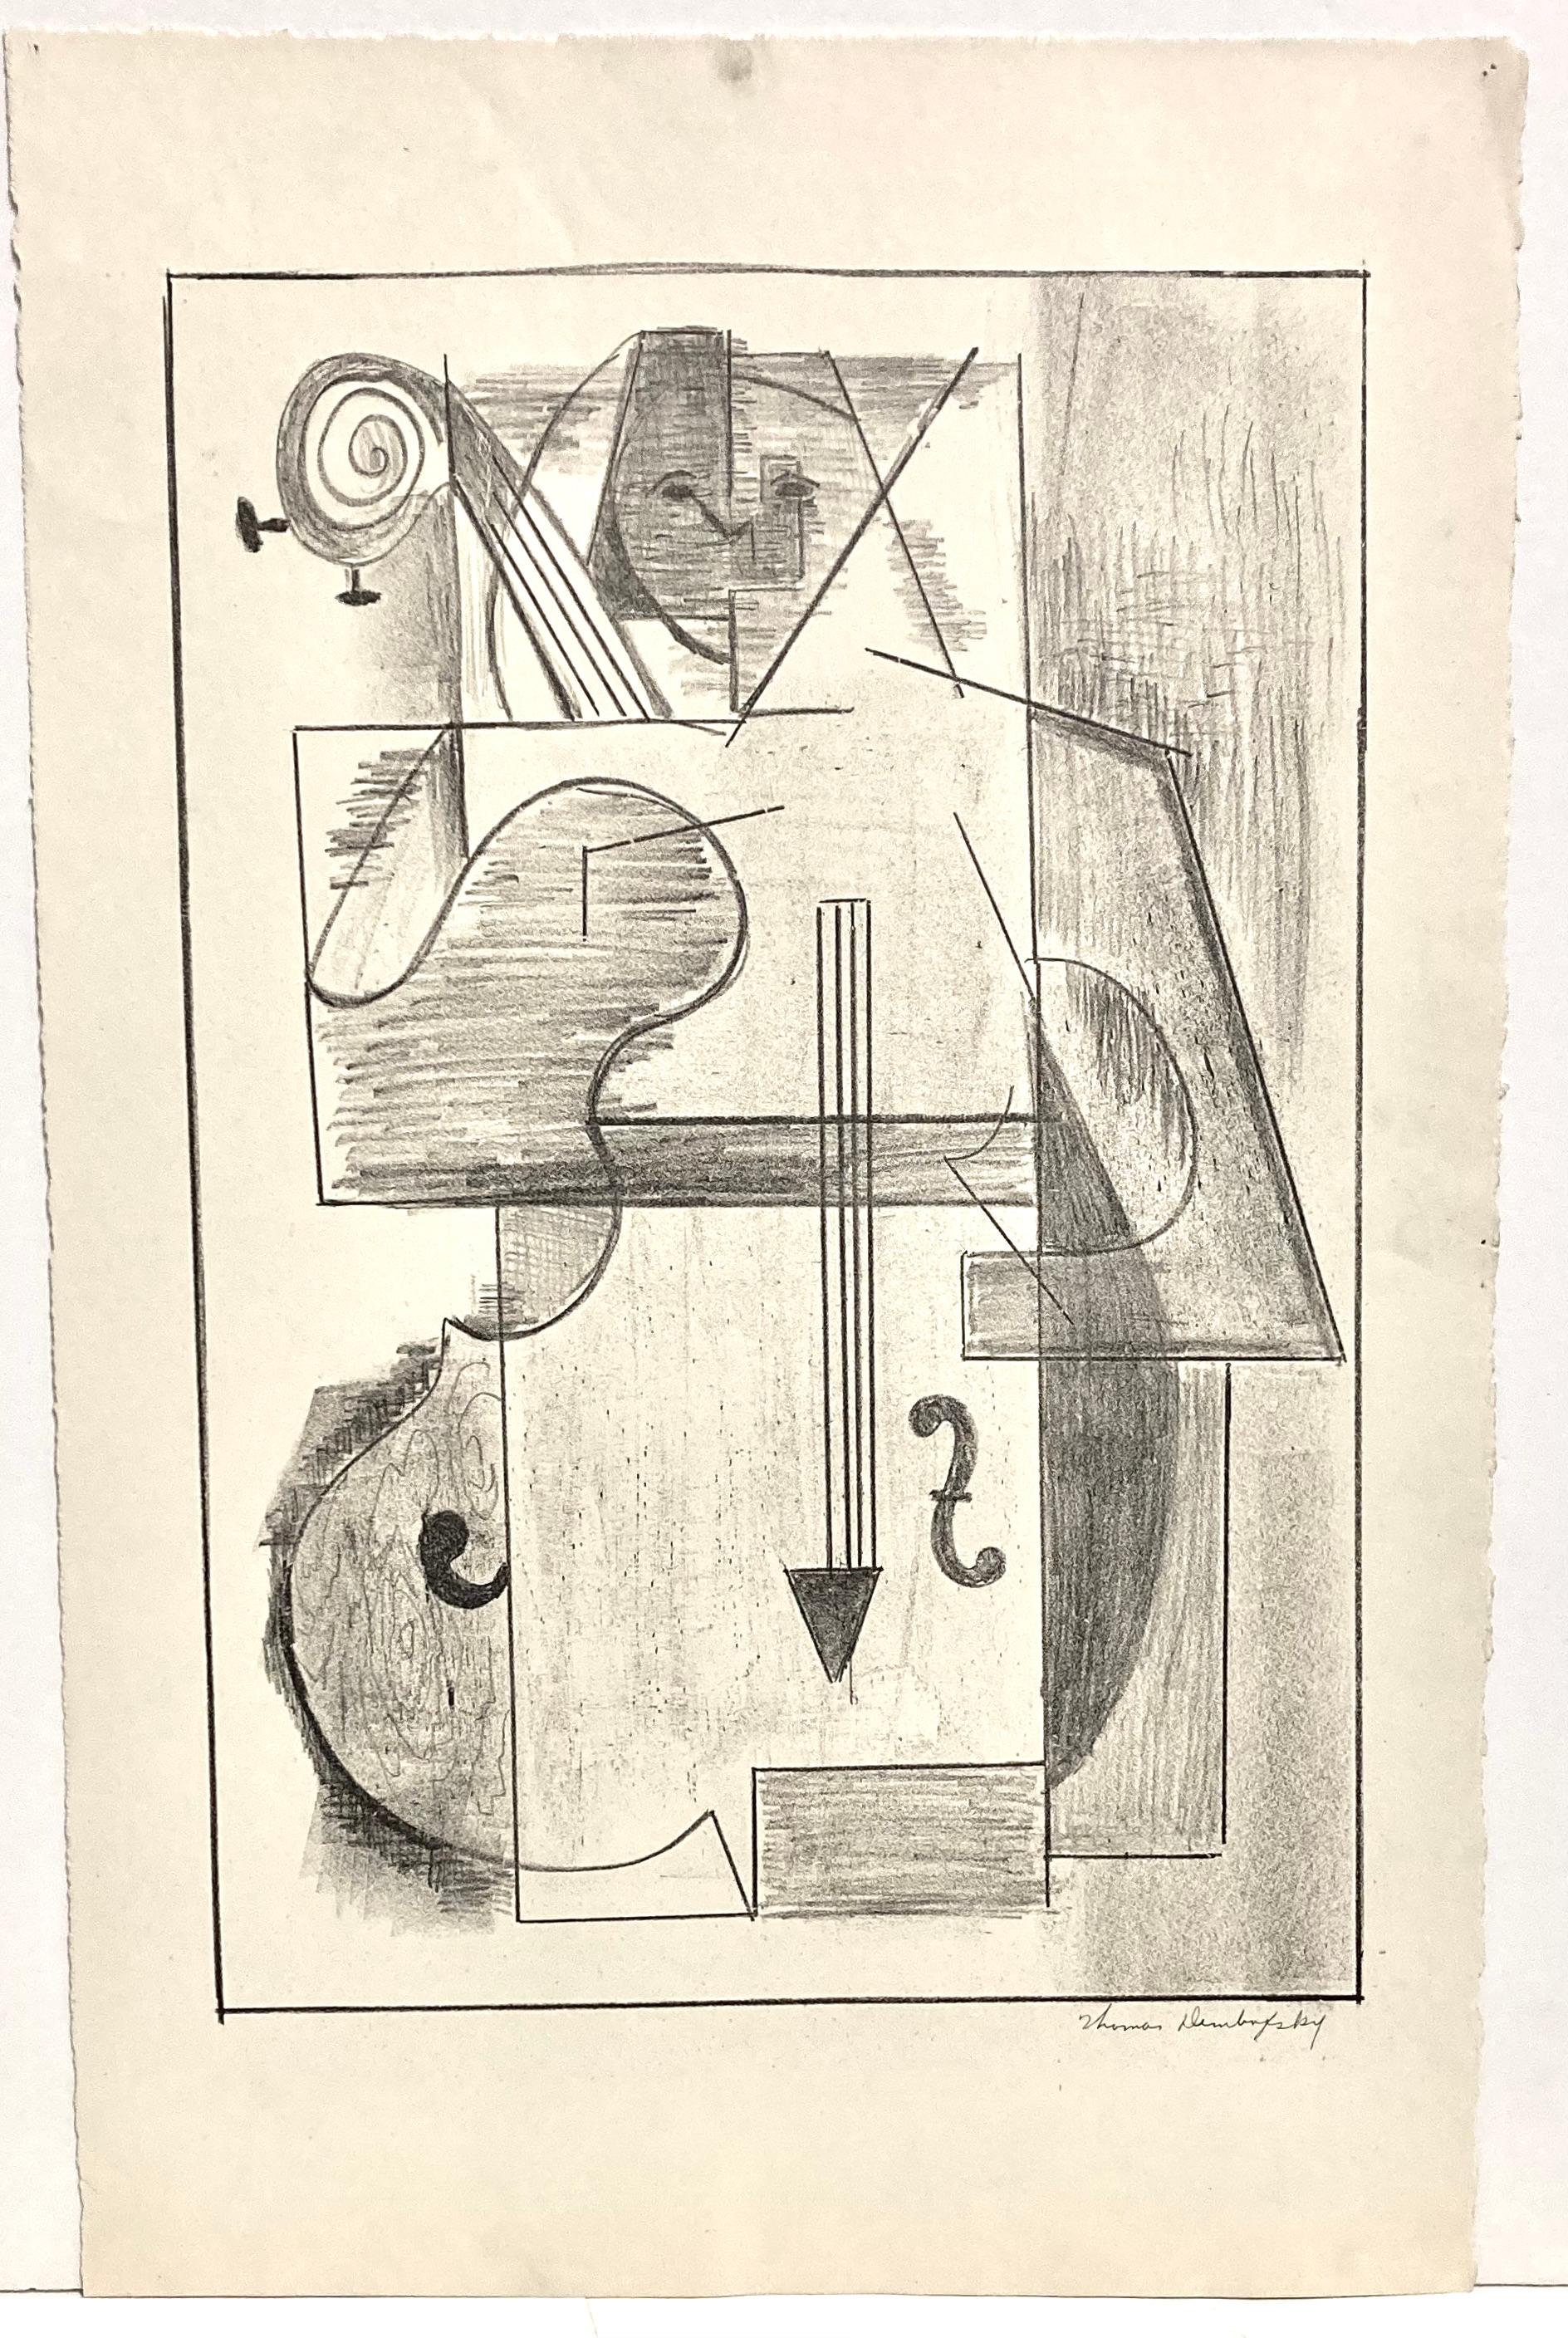 This full-on view of a musician and his bass (also known as an upright bass or string bass), has an air of calm befitting the lowest-pitched bowed instrument in an orchestra. One might think that the edges and right angles of this cubist composition